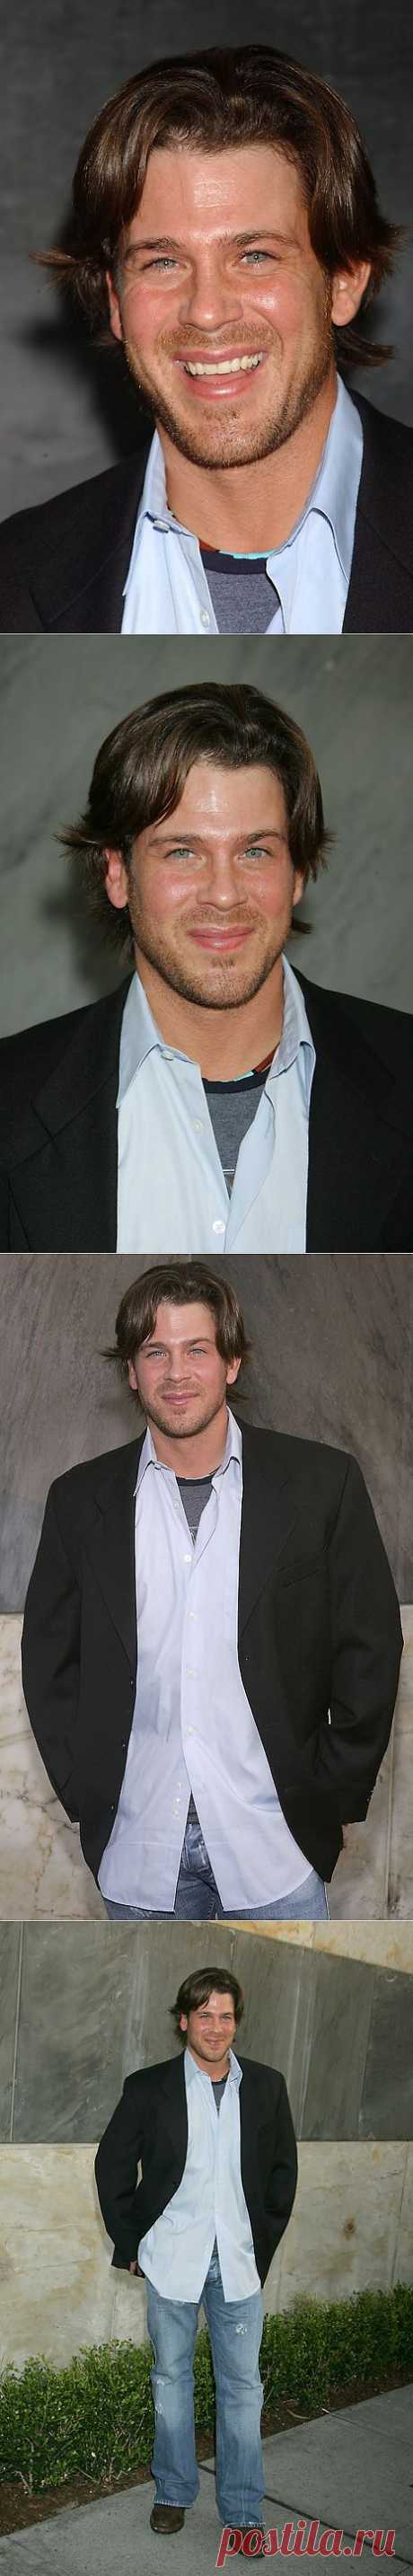 Christian Kane at the Hammer Museum in Westwood, California, CBS Summer 2005 Press Tour Party - Arrivals (Photo by Jeffrey Mayer/WireImage)